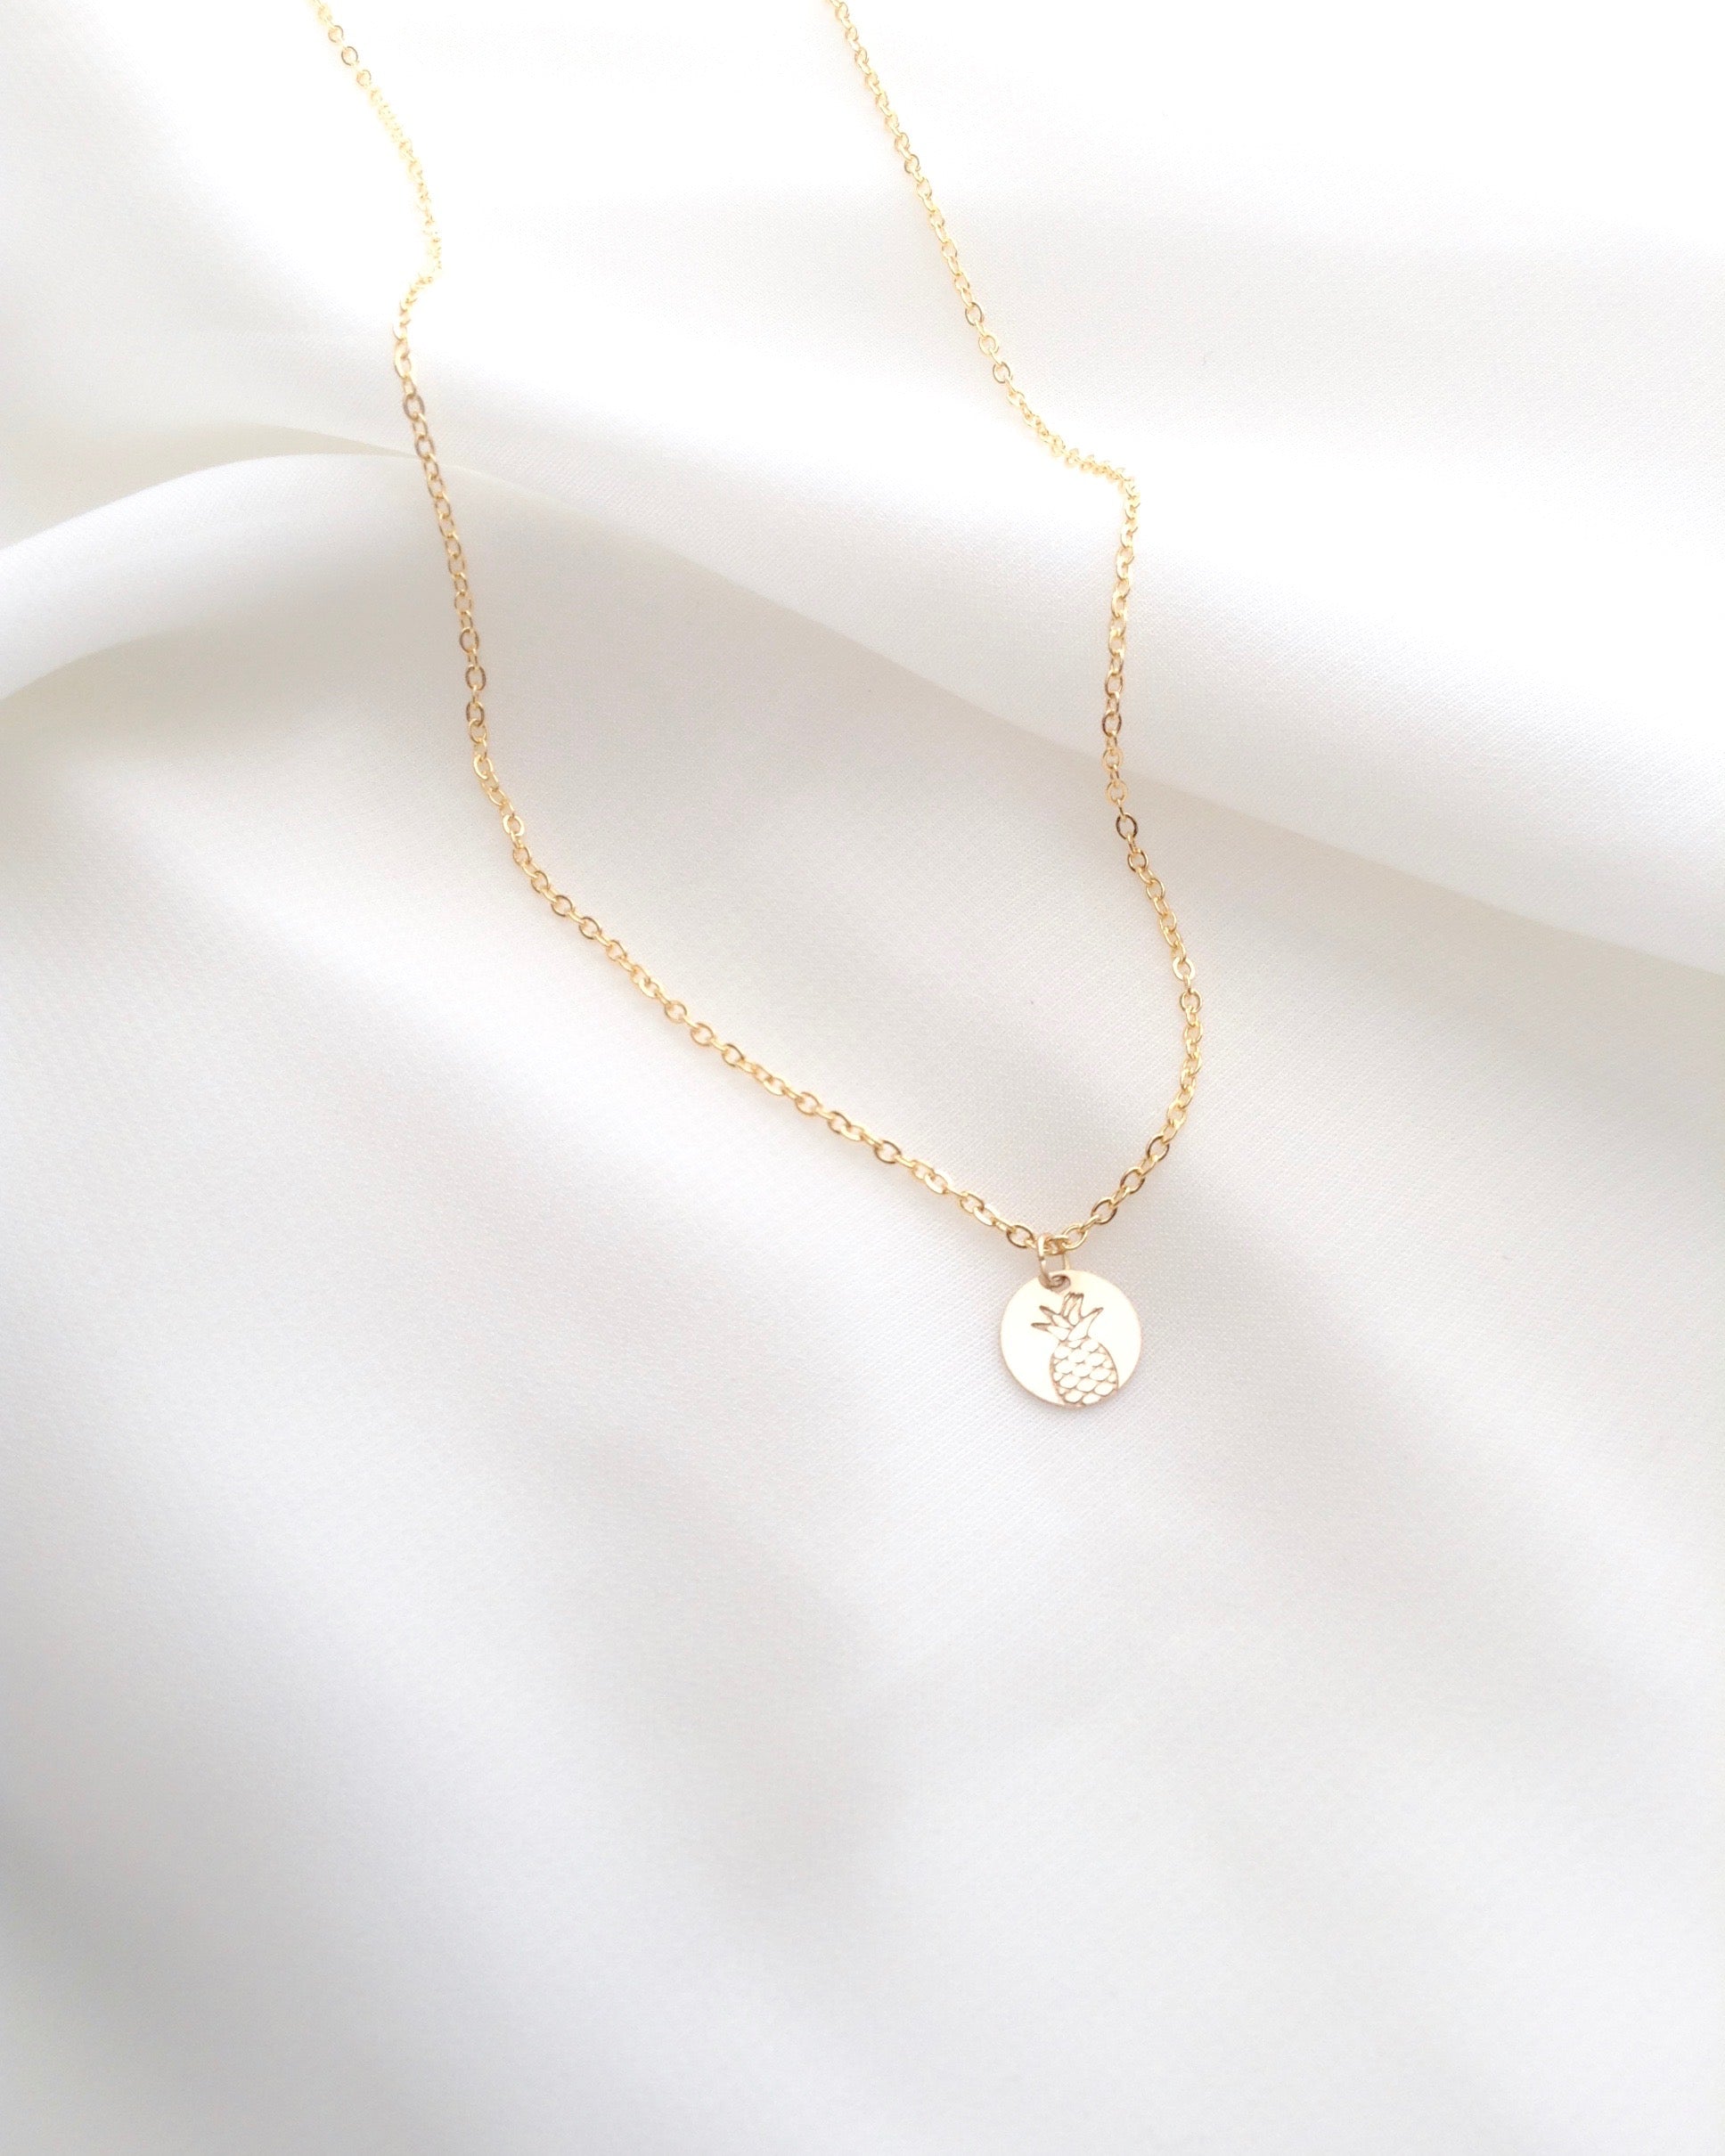 Pineapple Pendant Necklace | Simple Delicate Everyday Necklace | Small Dainty Necklace | IB Jewelry